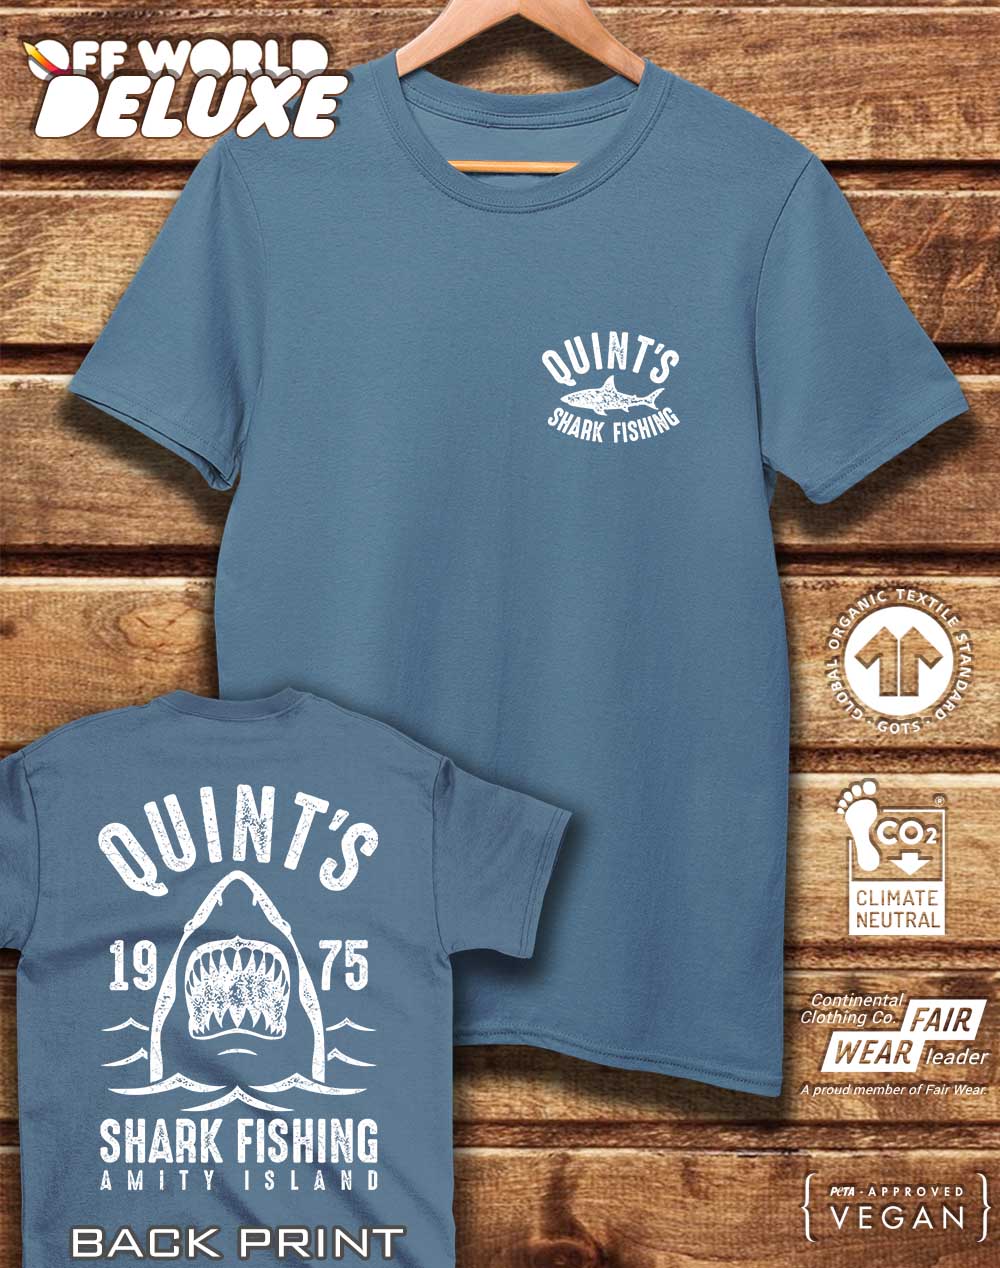 DELUXE Quint's Shark Fishing with Back Print Organic Cotton T